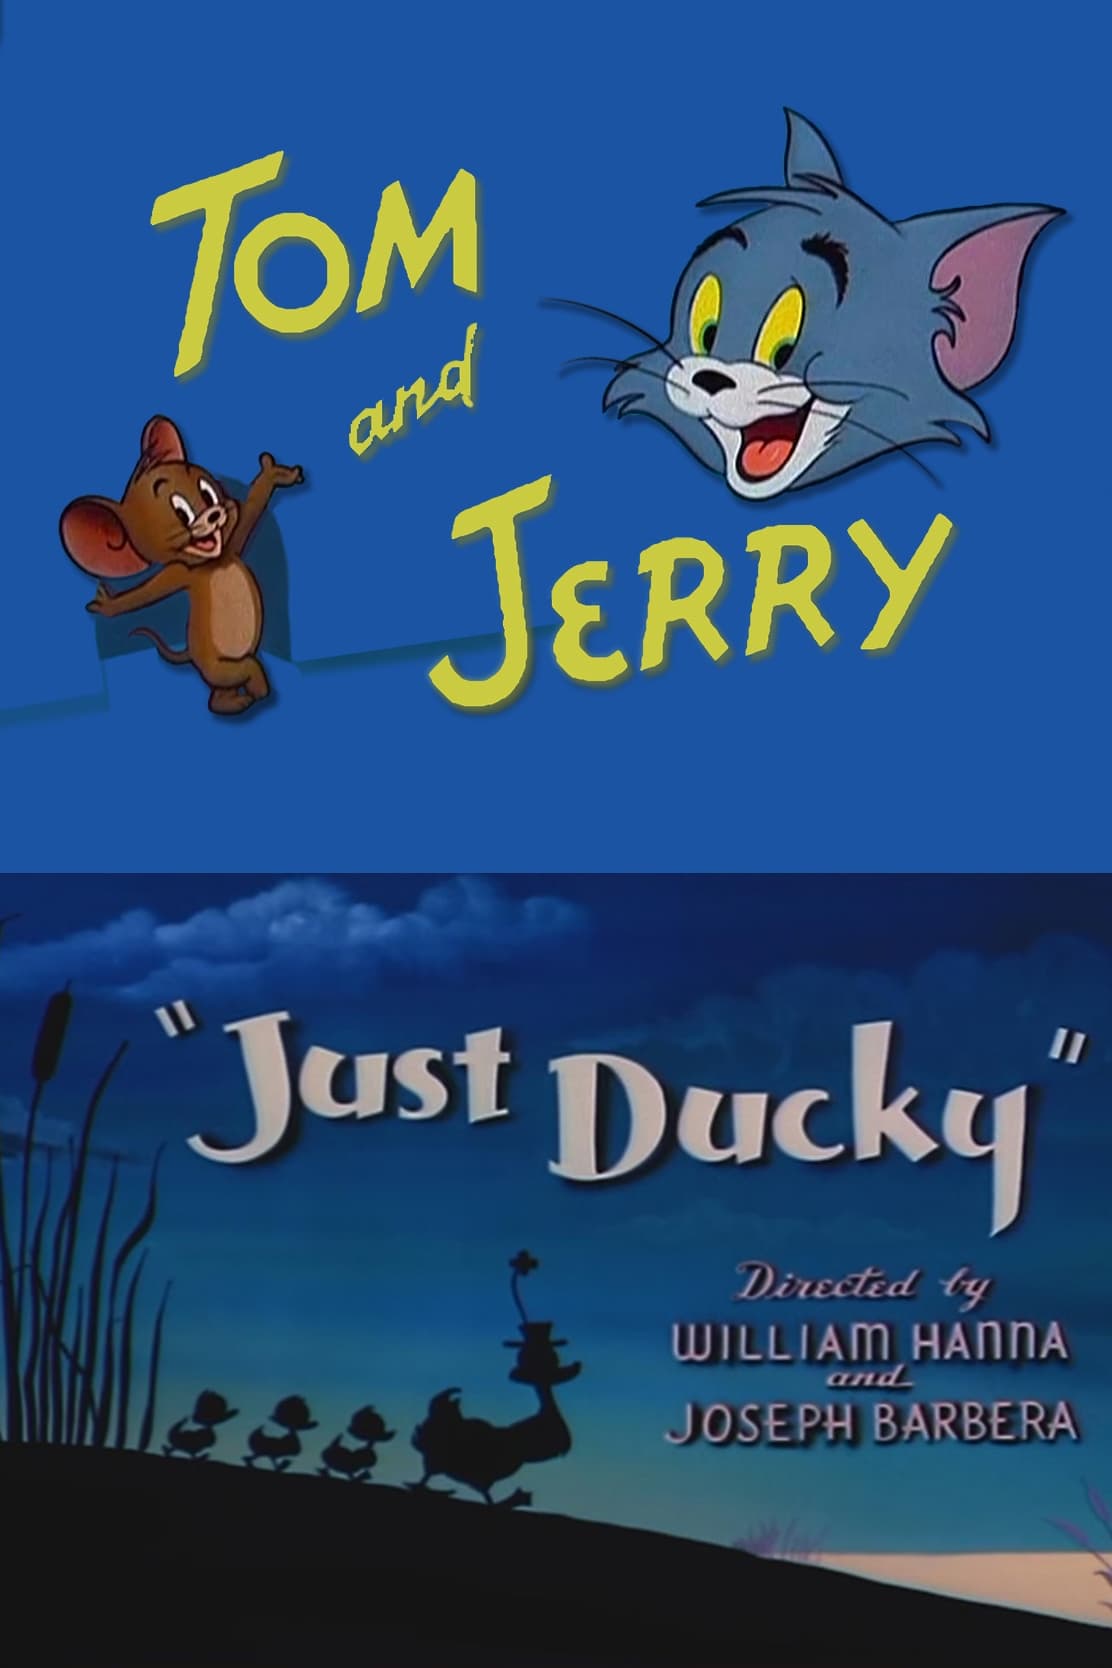 Just Ducky (1953)